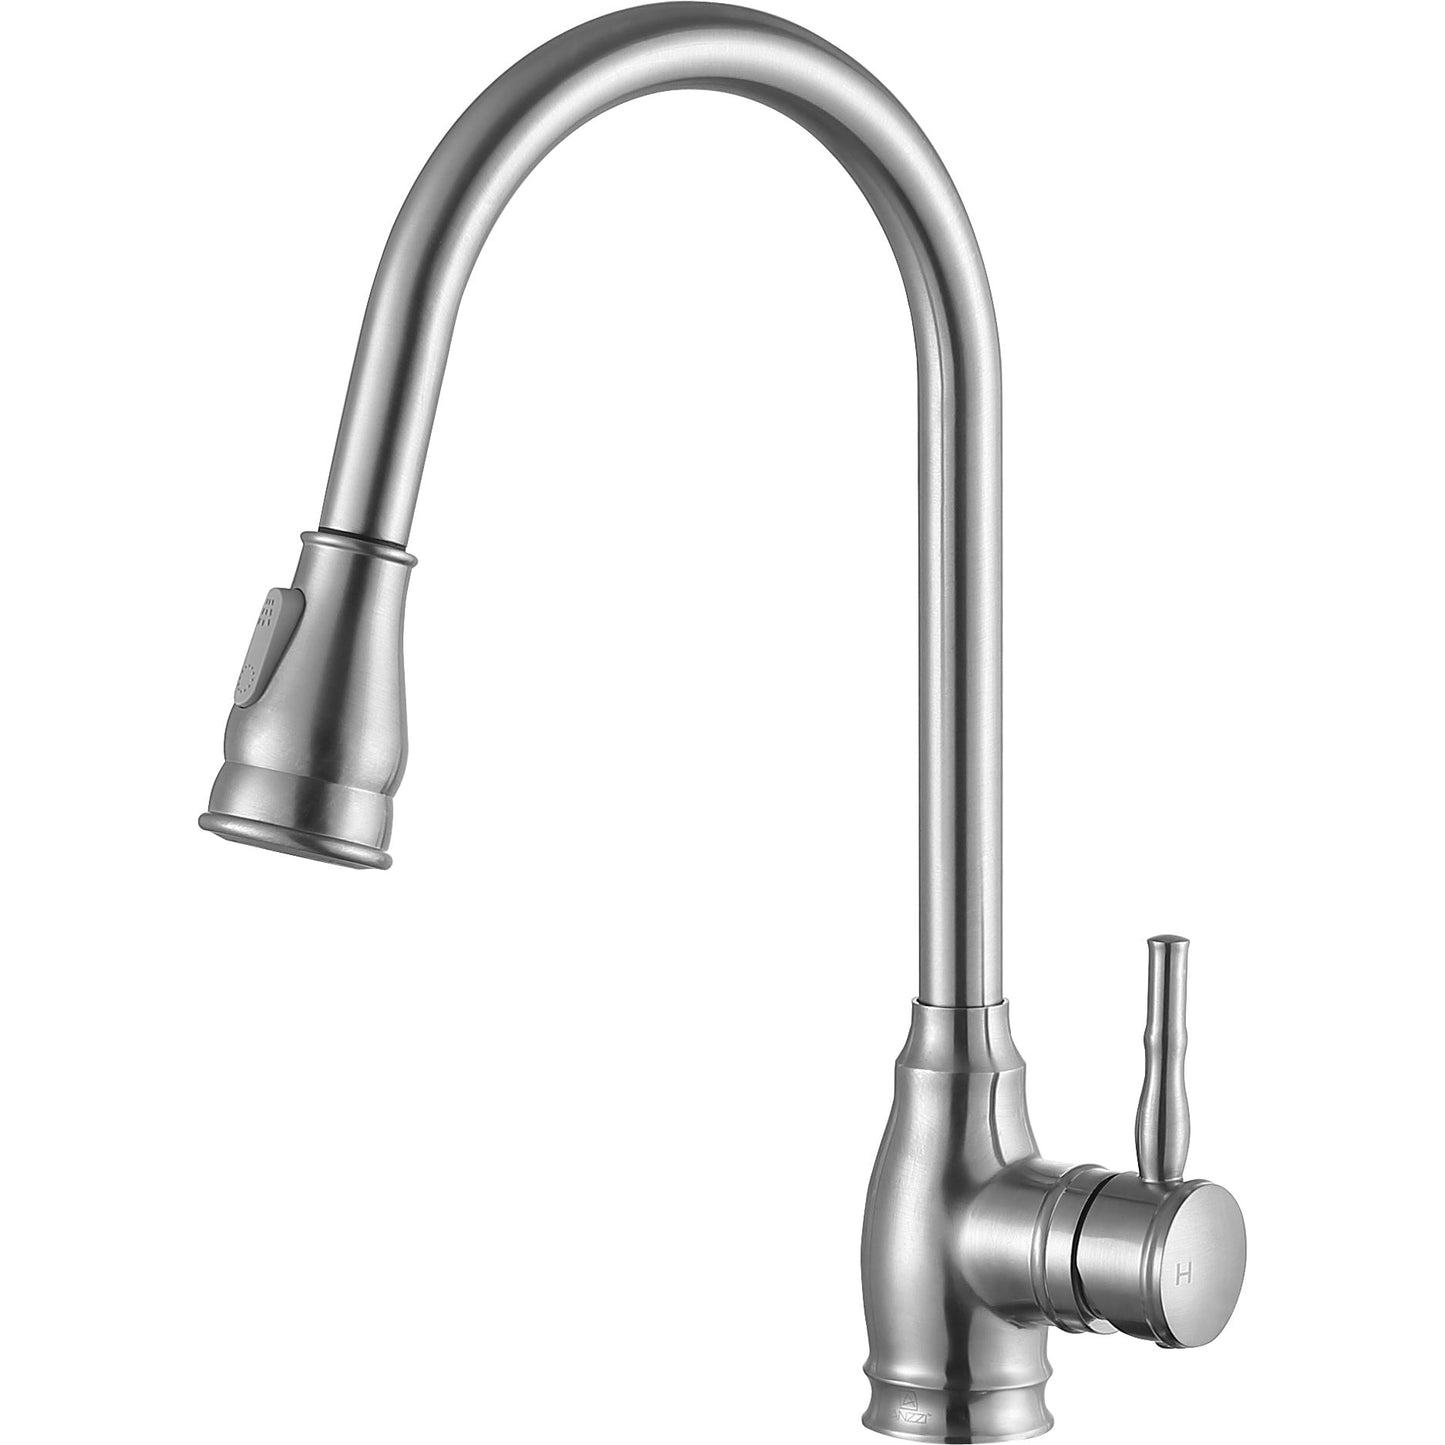 ANZZI Bell Series Single Hole Brushed Nickel Kitchen Faucet With Euro-Grip Pull Down Sprayer